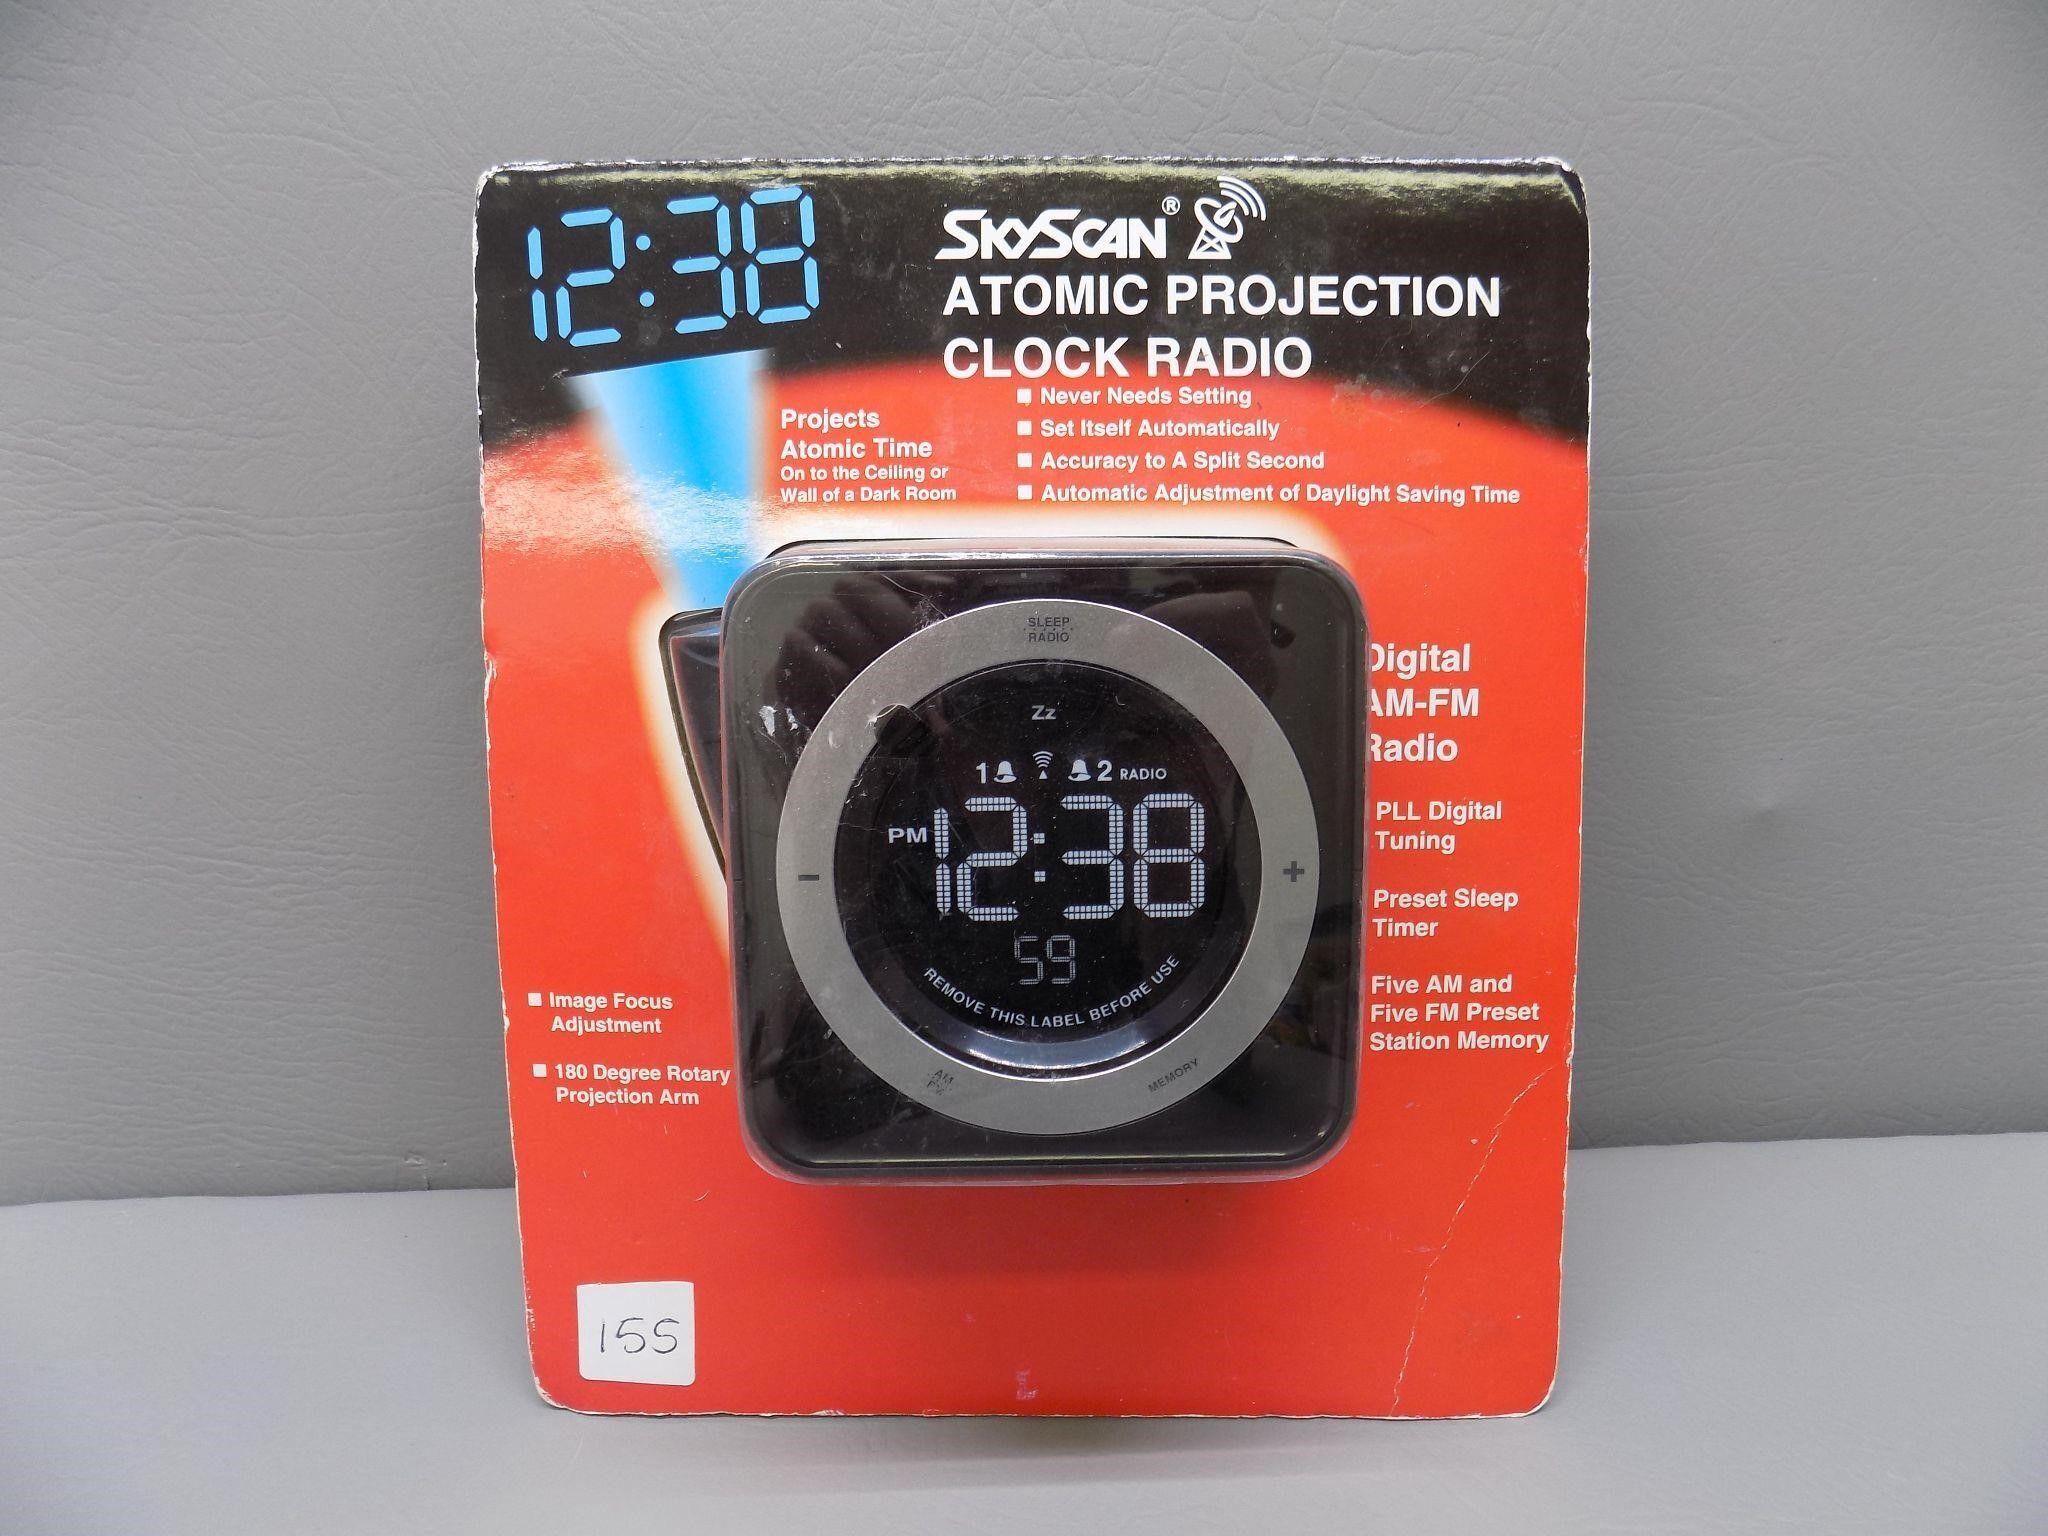 Sky Scan Atomic Projection Clock